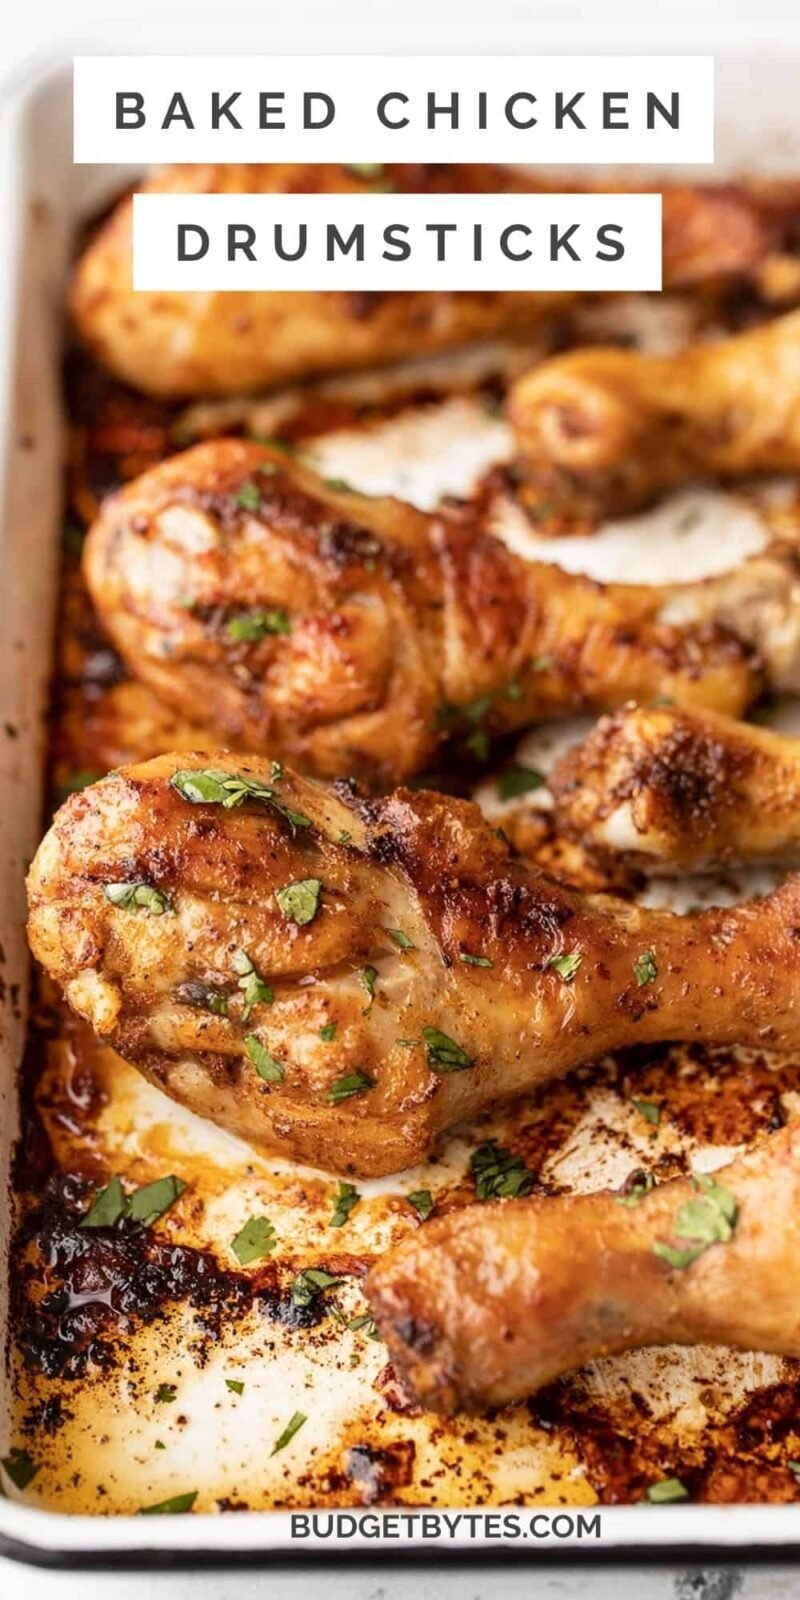 Close up of baked chicken drumsticks on a baking sheet, title text at the top